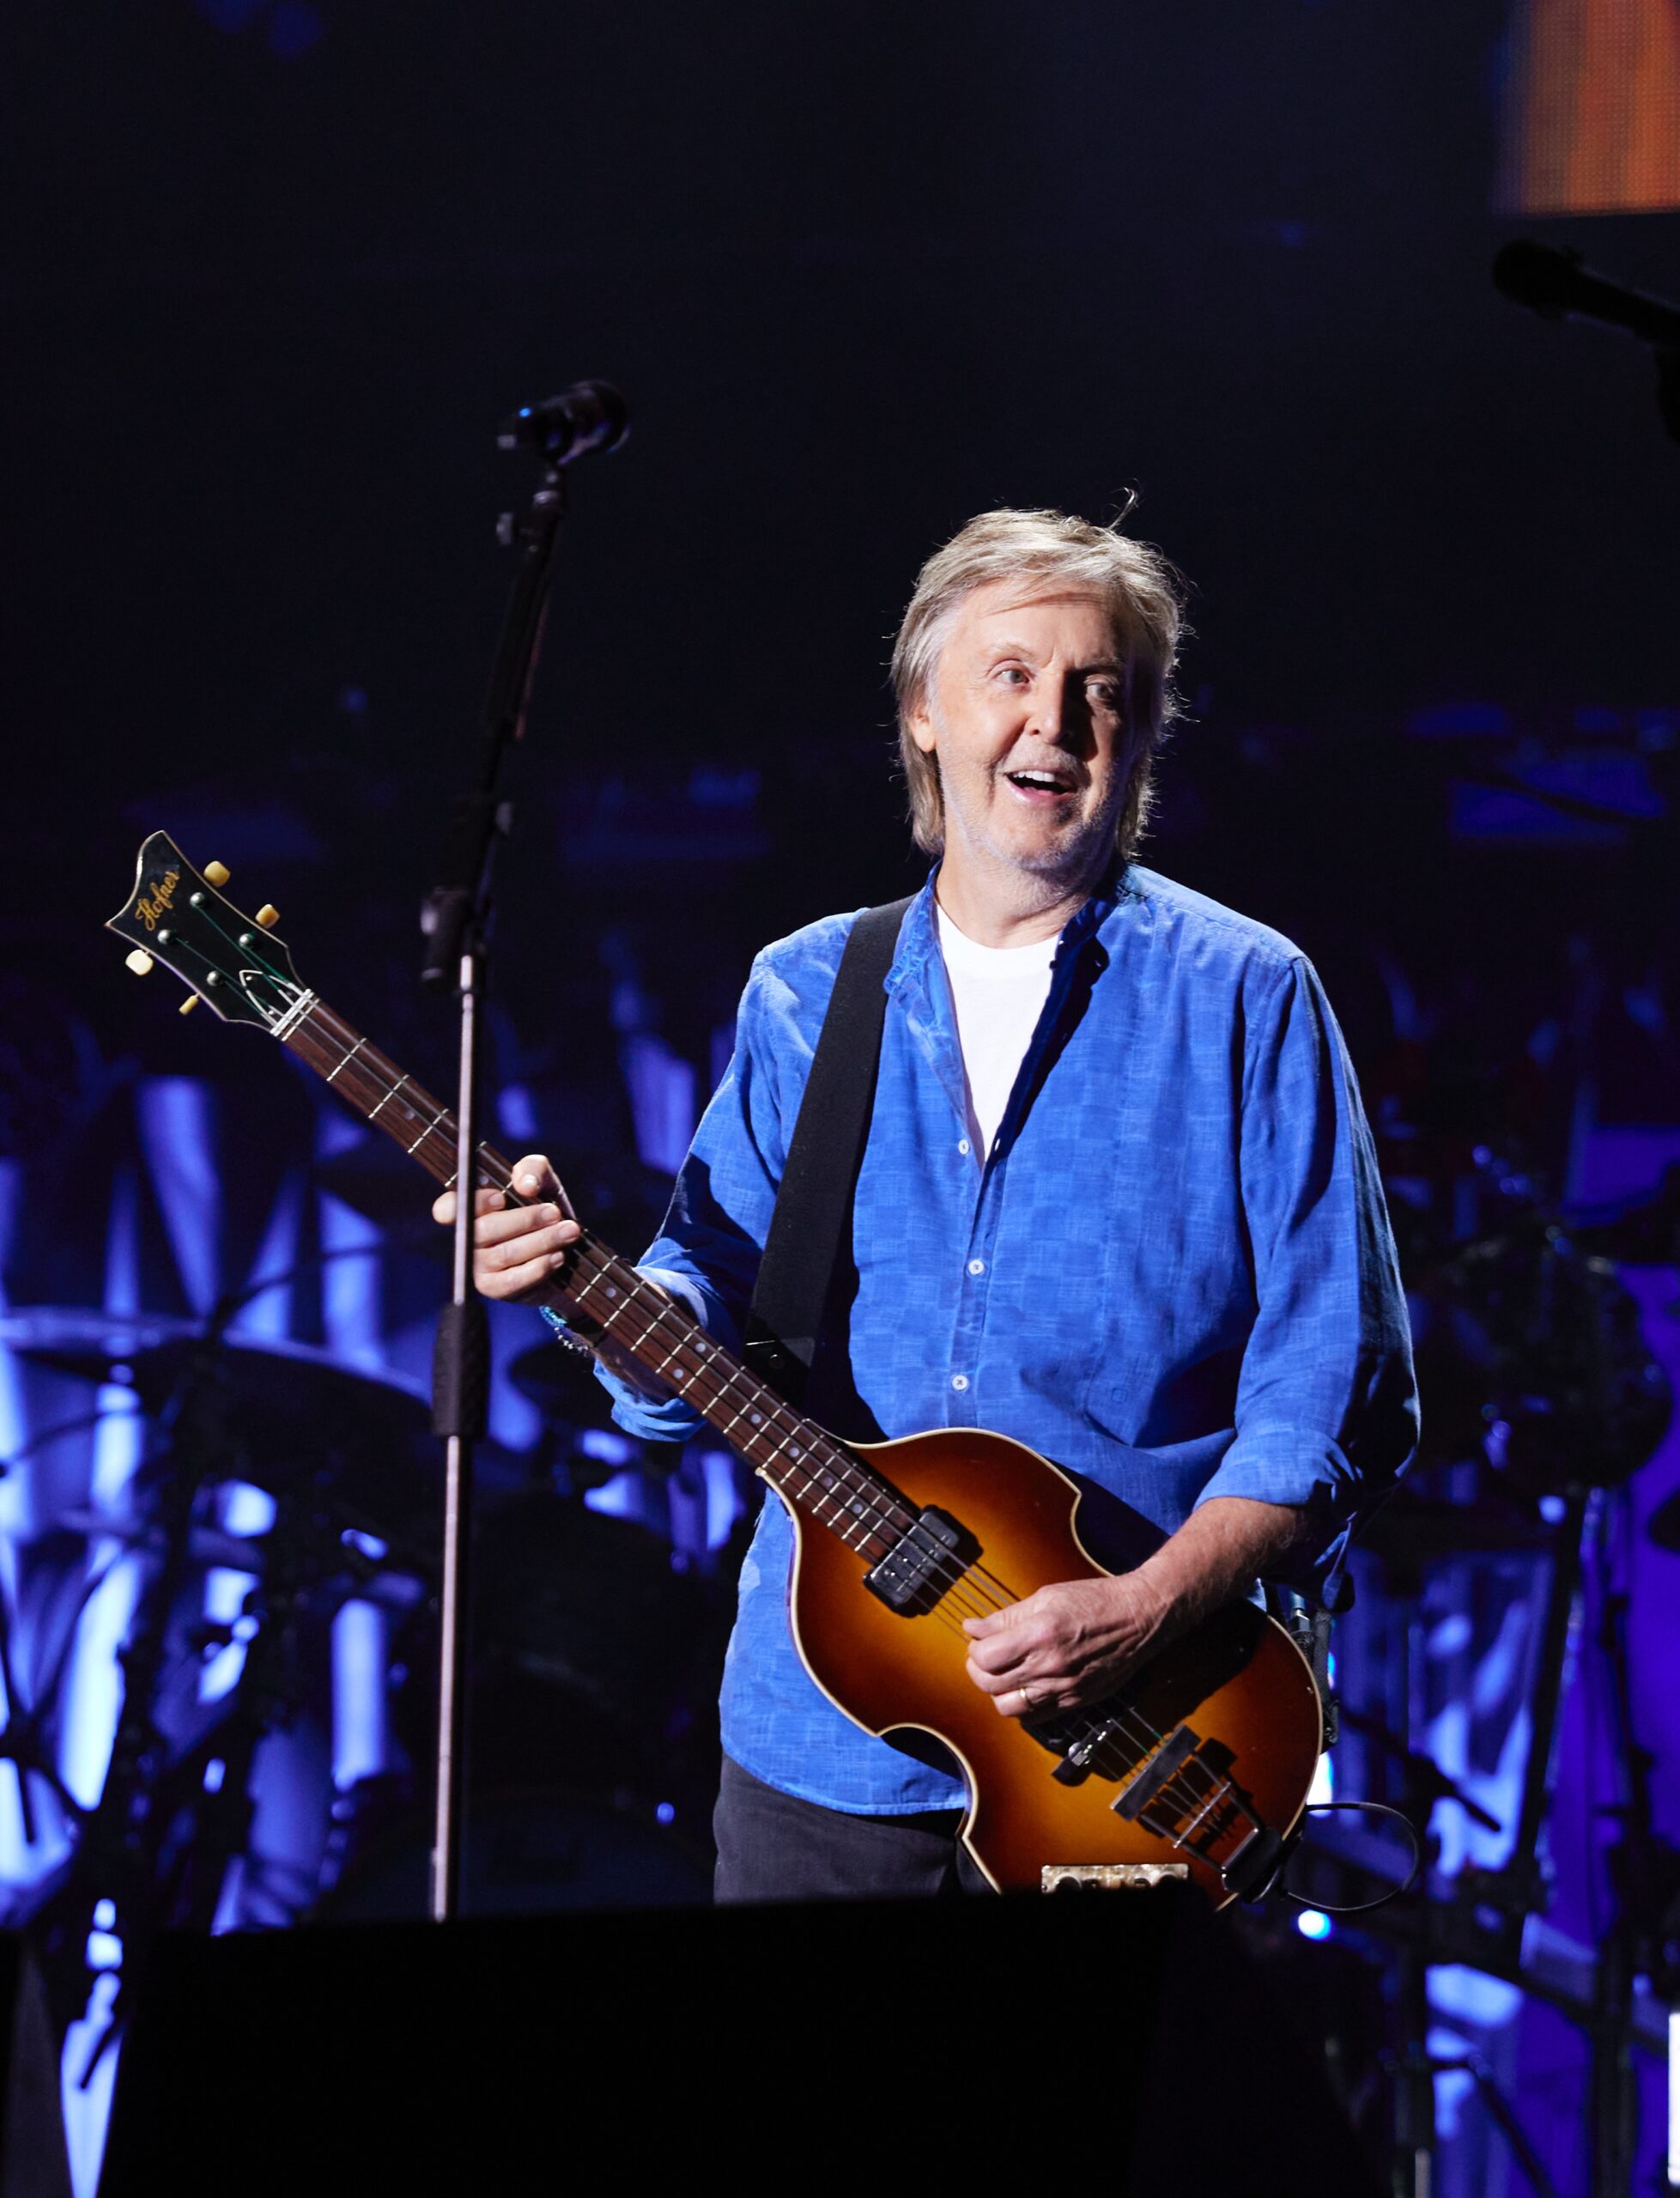 What Is Paul McCartney's Favorite Song? The Beatles Song That, 'If Pushed', Paul McCartney Would Claim As His Favorite